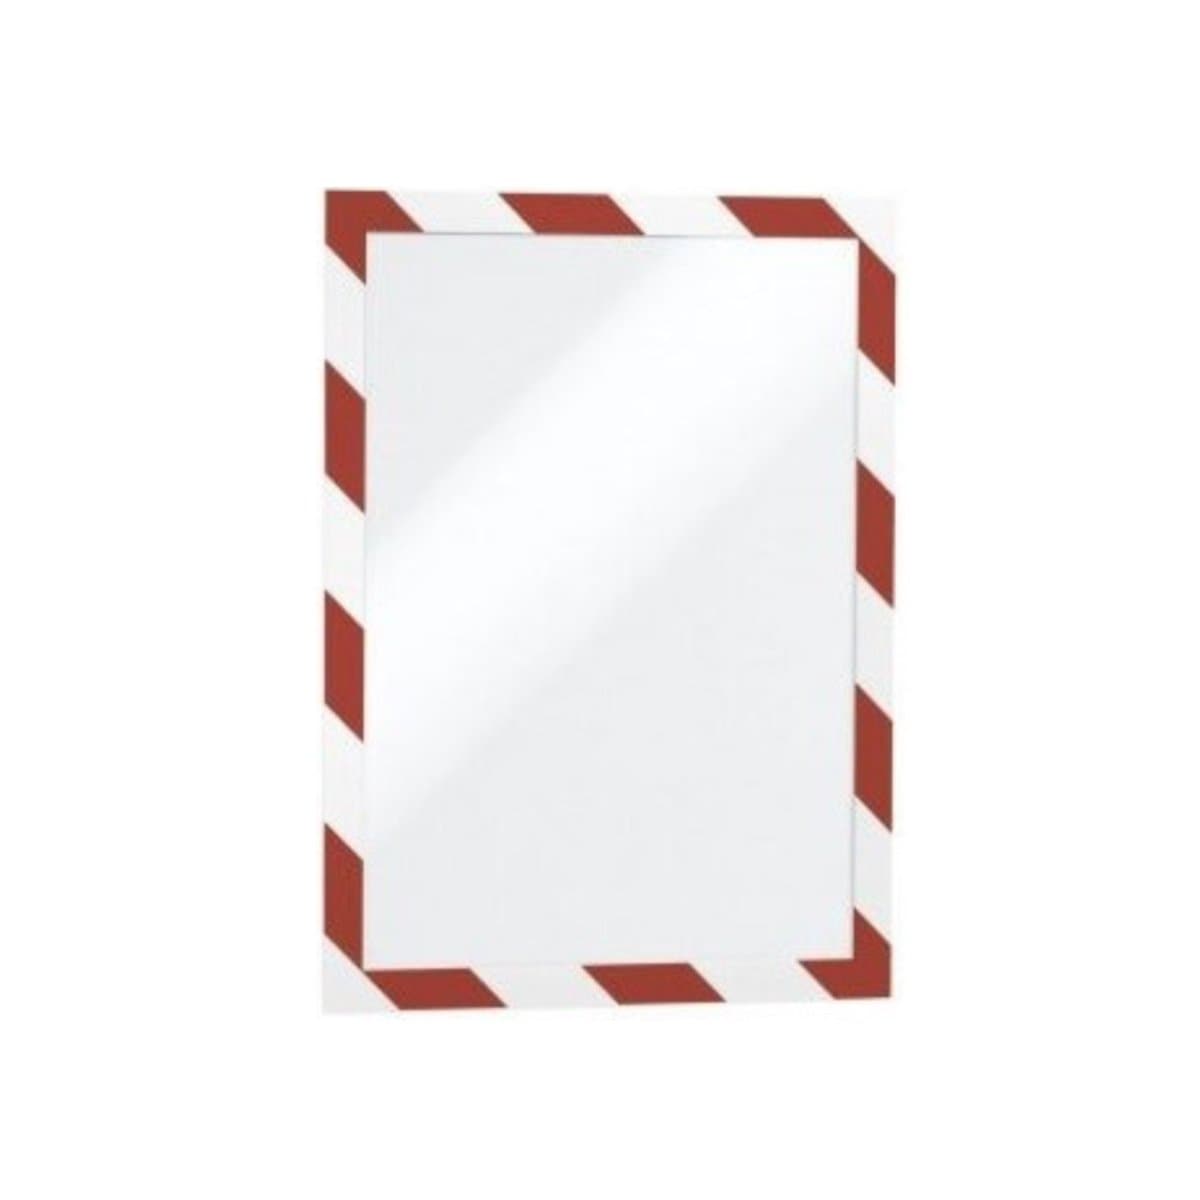 Durable DURAFRAME Security, Self-Adhesive Magnetic Frame A4, 2/pack, Red/White